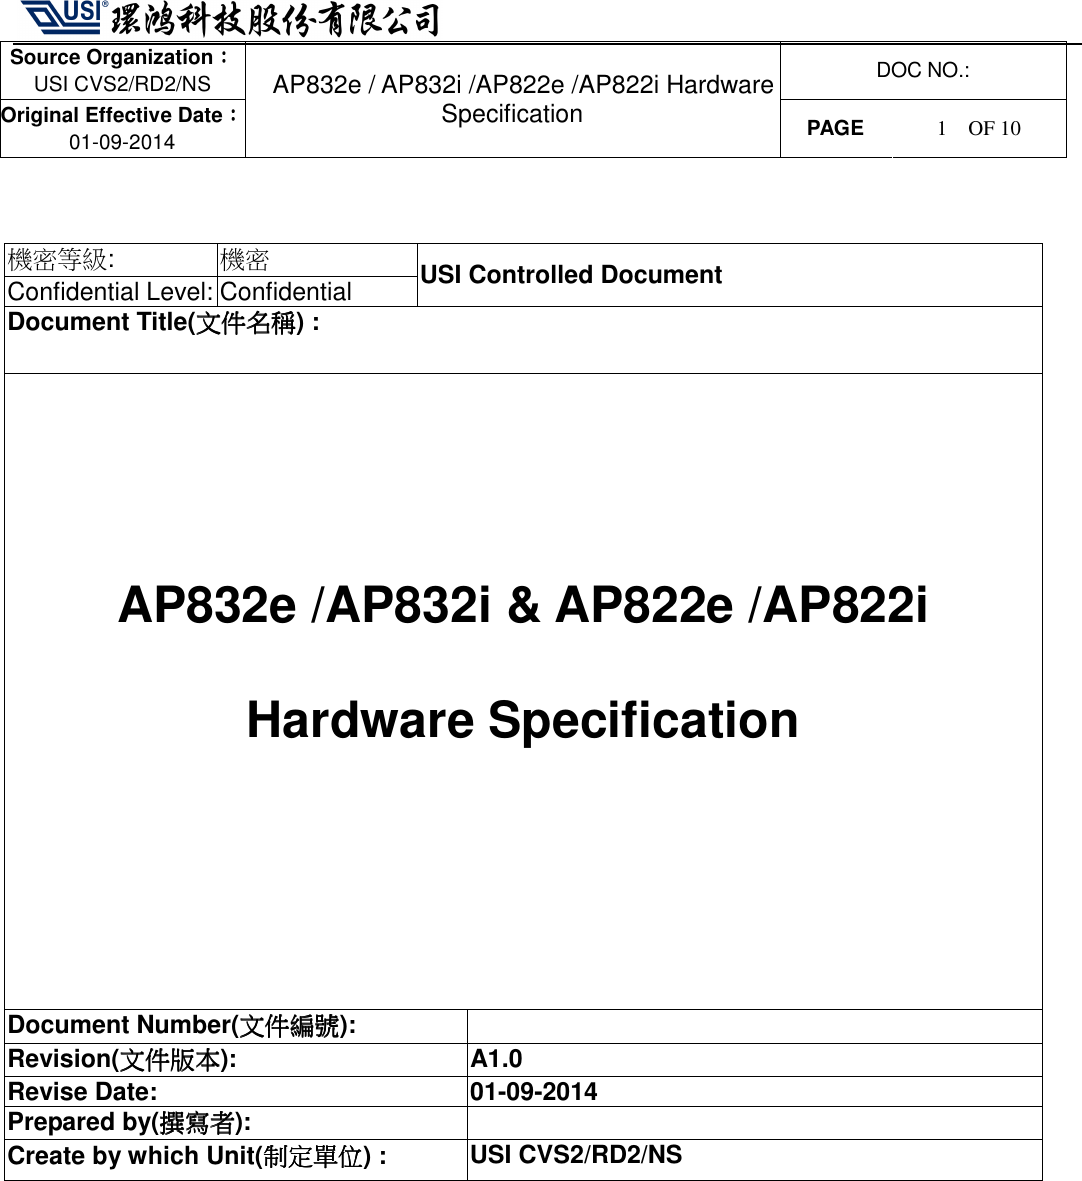   Source Organization：：：： USI CVS2/RD2/NS  DOC NO.: Original Effective Date：：：： 01-09-2014 AP832e / AP832i /AP822e /AP822i Hardware Specification PAGE  1    OF 10     機密等級:  機密 Confidential Level: Confidential  USI Controlled Document Document Title(文件名稱文件名稱文件名稱文件名稱) :   AP832e /AP832i &amp; AP822e /AP822i Hardware Specification Document Number(文件編號文件編號文件編號文件編號):   Revision(文件版本文件版本文件版本文件版本):  A1.0 Revise Date:  01-09-2014 Prepared by(撰寫者撰寫者撰寫者撰寫者):   Create by which Unit(制定單位制定單位制定單位制定單位) :  USI CVS2/RD2/NS          